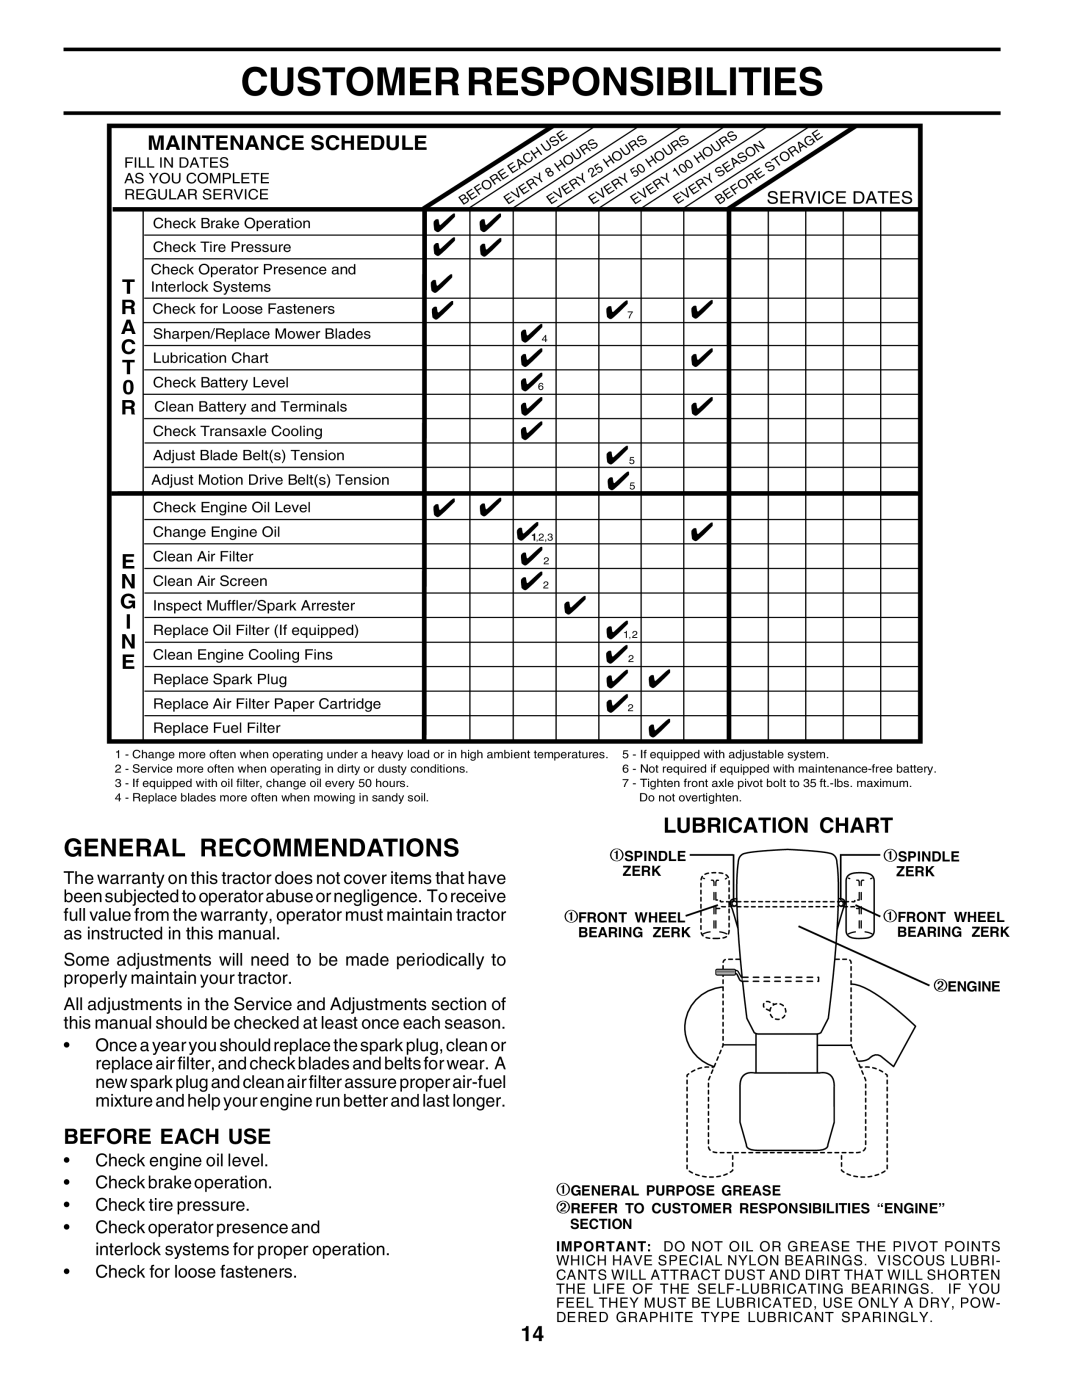 Poulan 182080 manual Customer Responsibilities, General Recommendations, Before Each Use, Lubrication Chart 